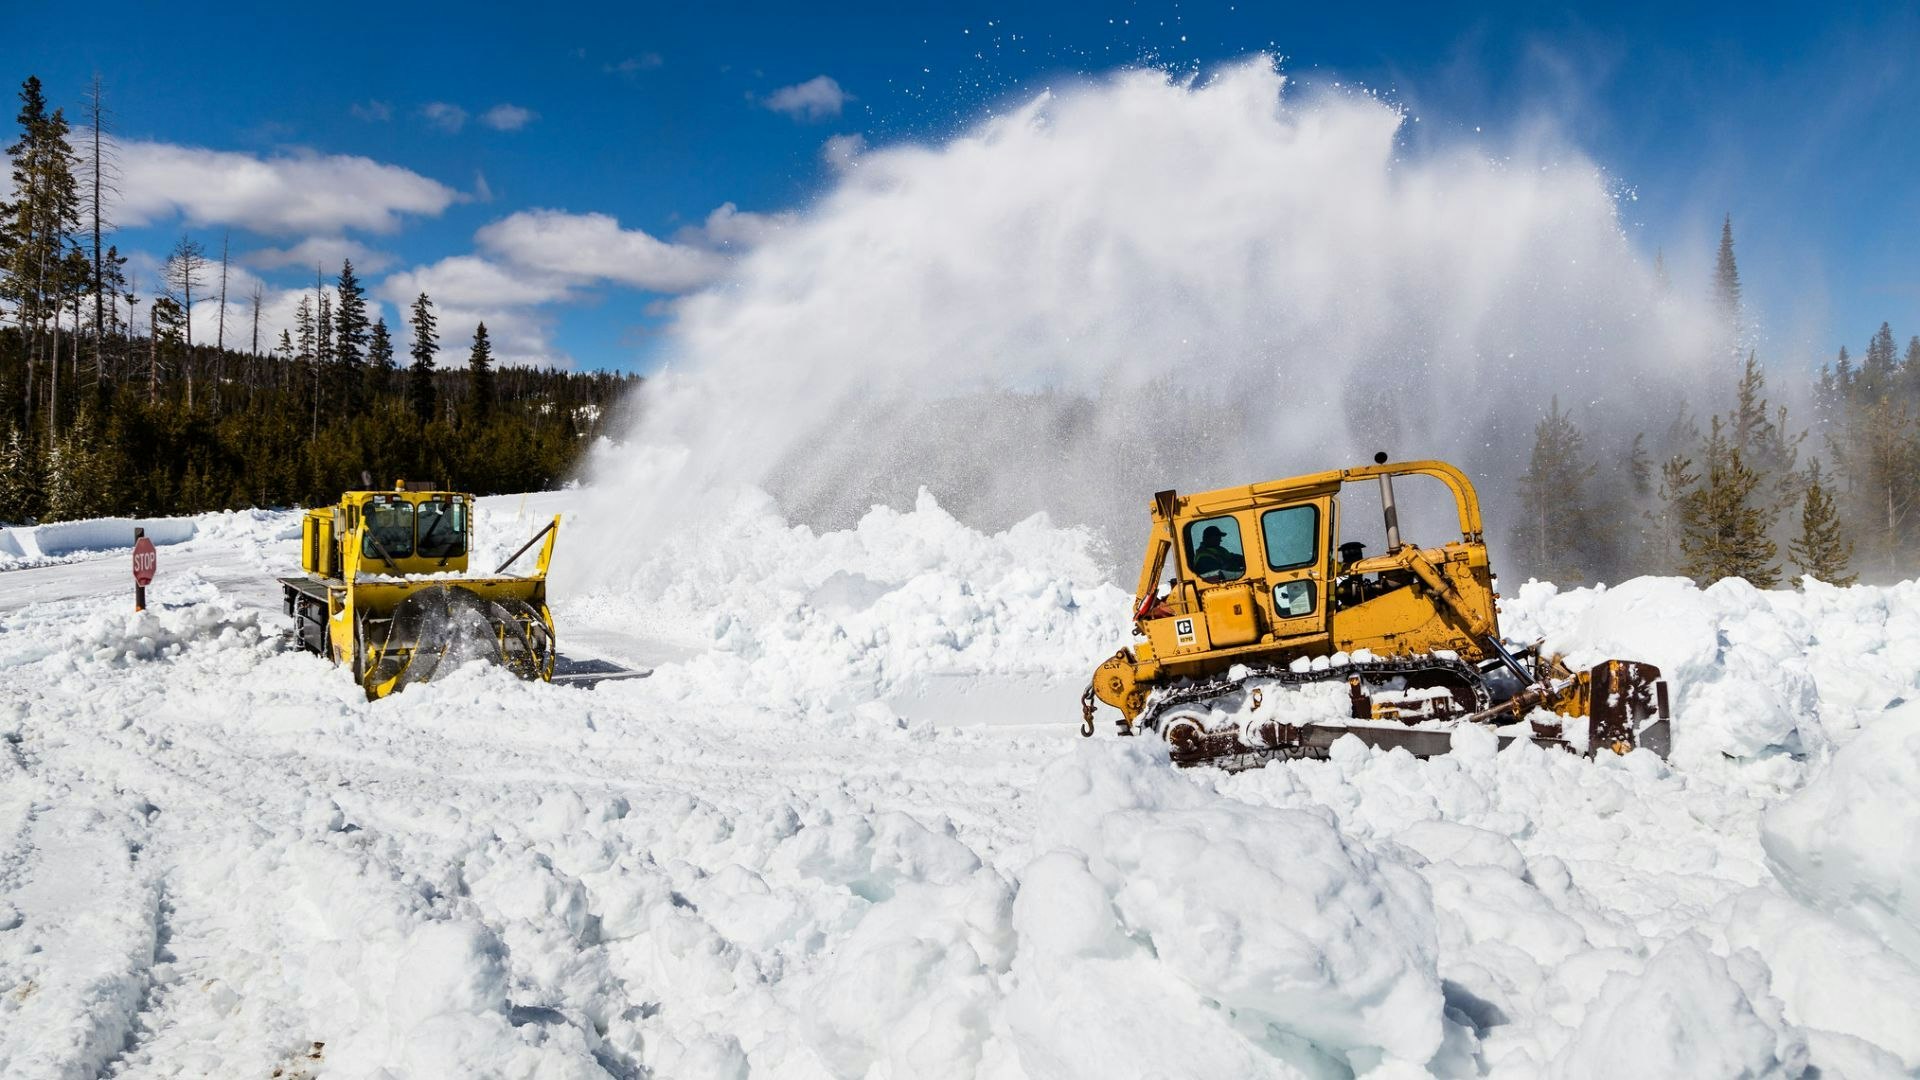 Yellowstone National Park officials say roads will be cleared of snow in time for Friday's East Entrance opening, but weather could close it soon after.